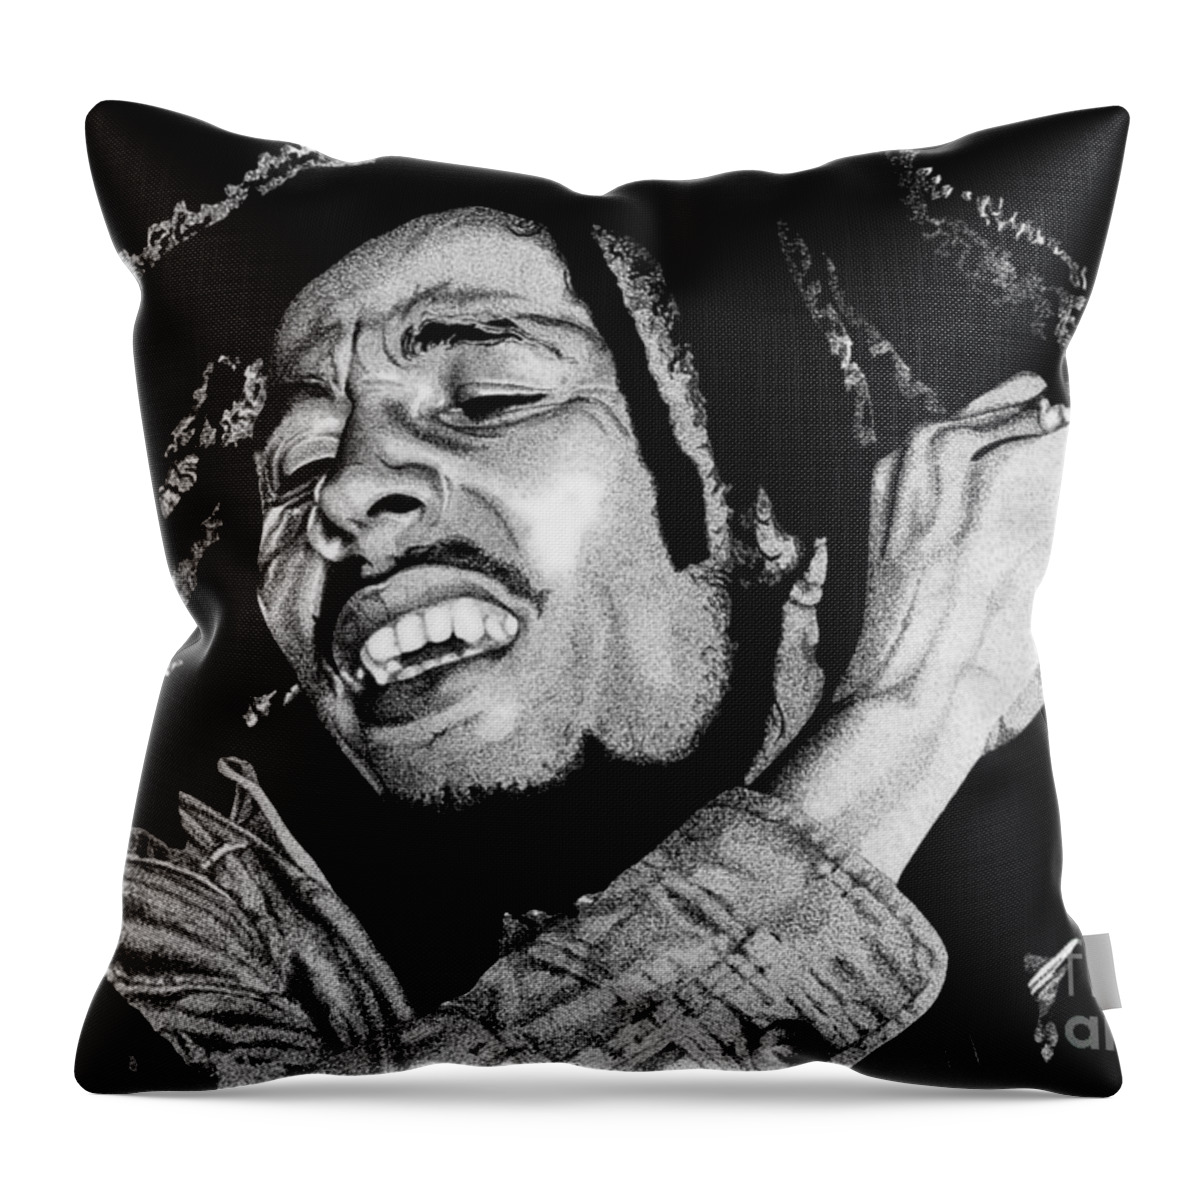 Bob Marley Throw Pillow featuring the drawing No Woman No Cry by Cory Still